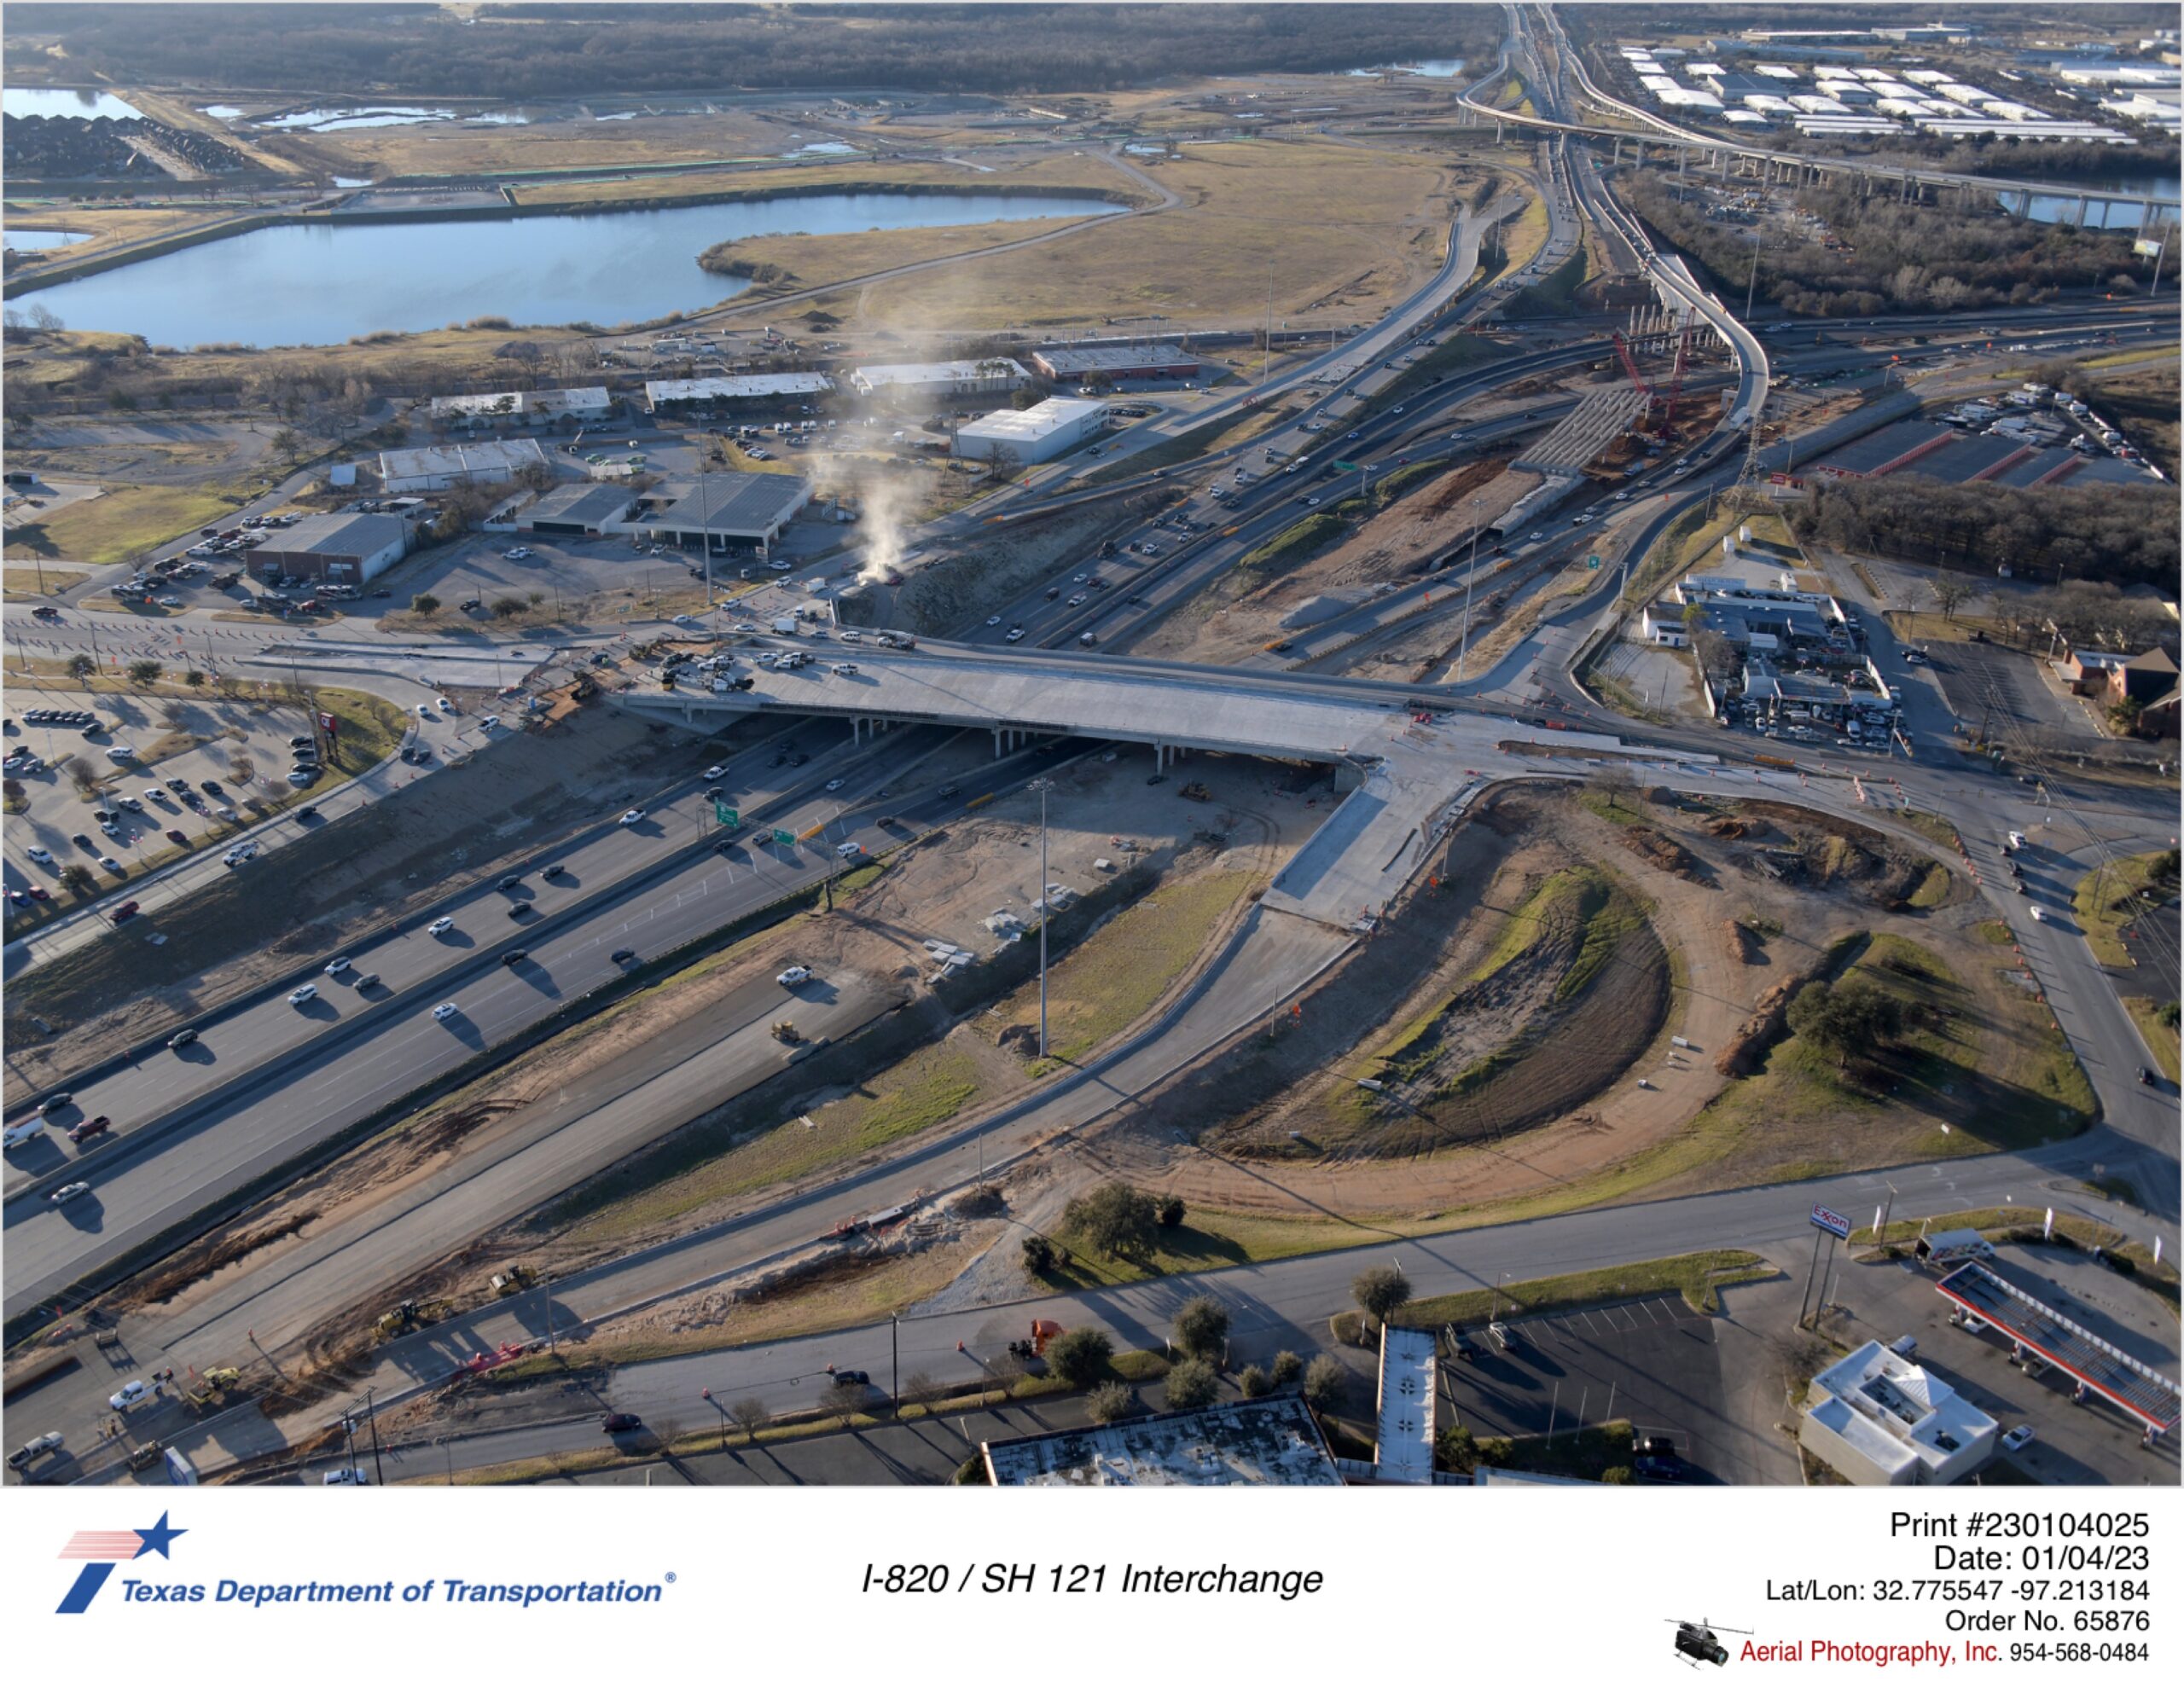 I-820 and SH 20 interchange looking southeast.